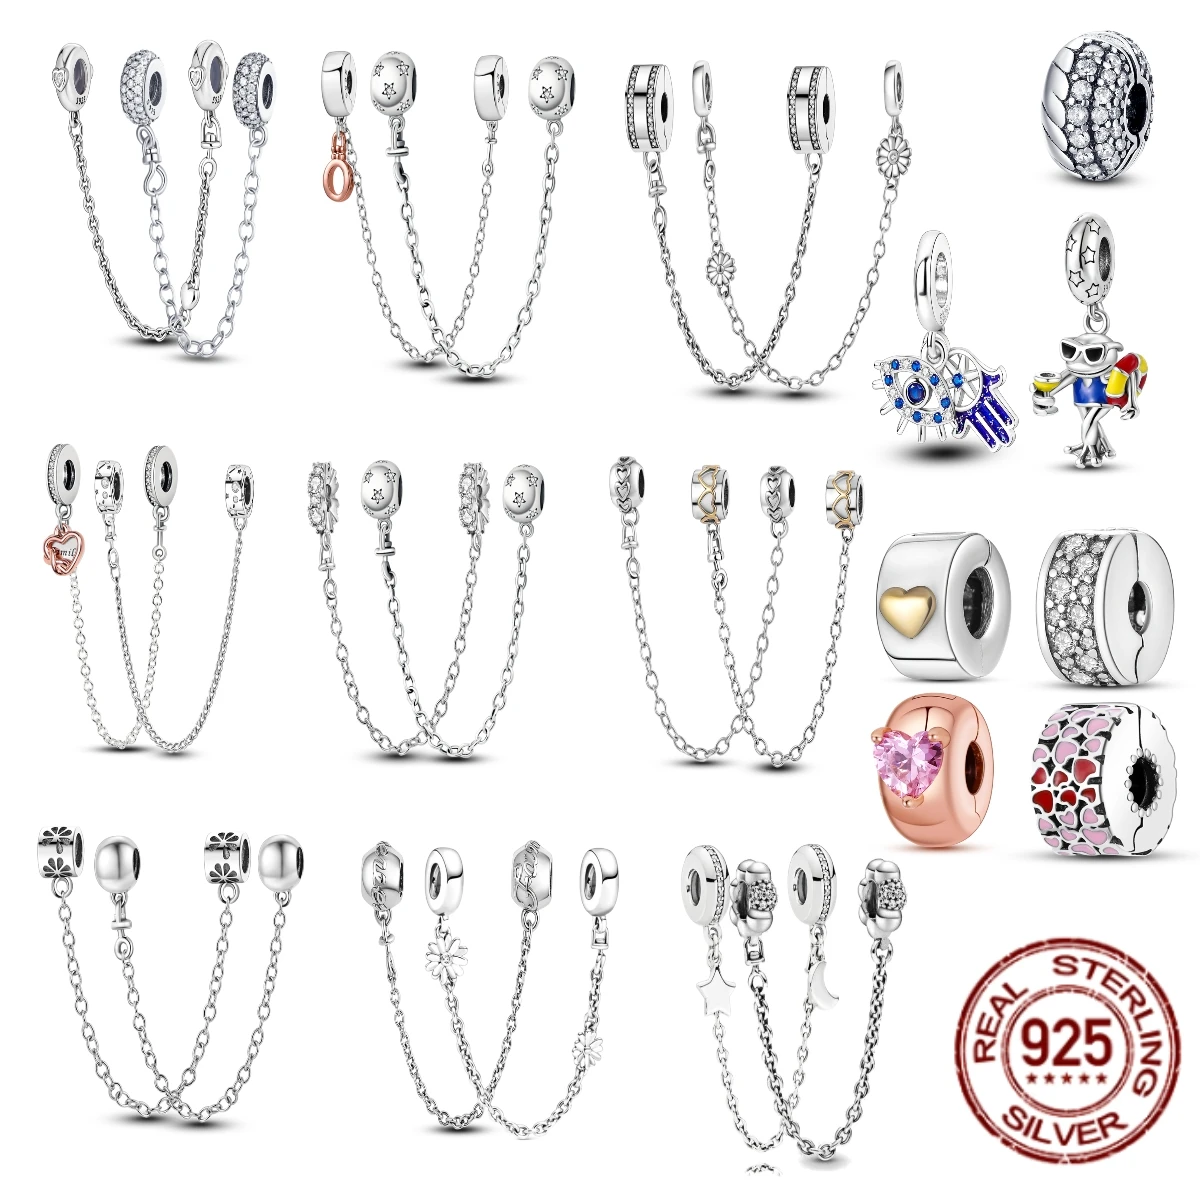 

The new 925 Sterling Silver Safety Chain Charm Positioning Clasp Fits The Original Bracelet Charm DIY Women's Jewelry